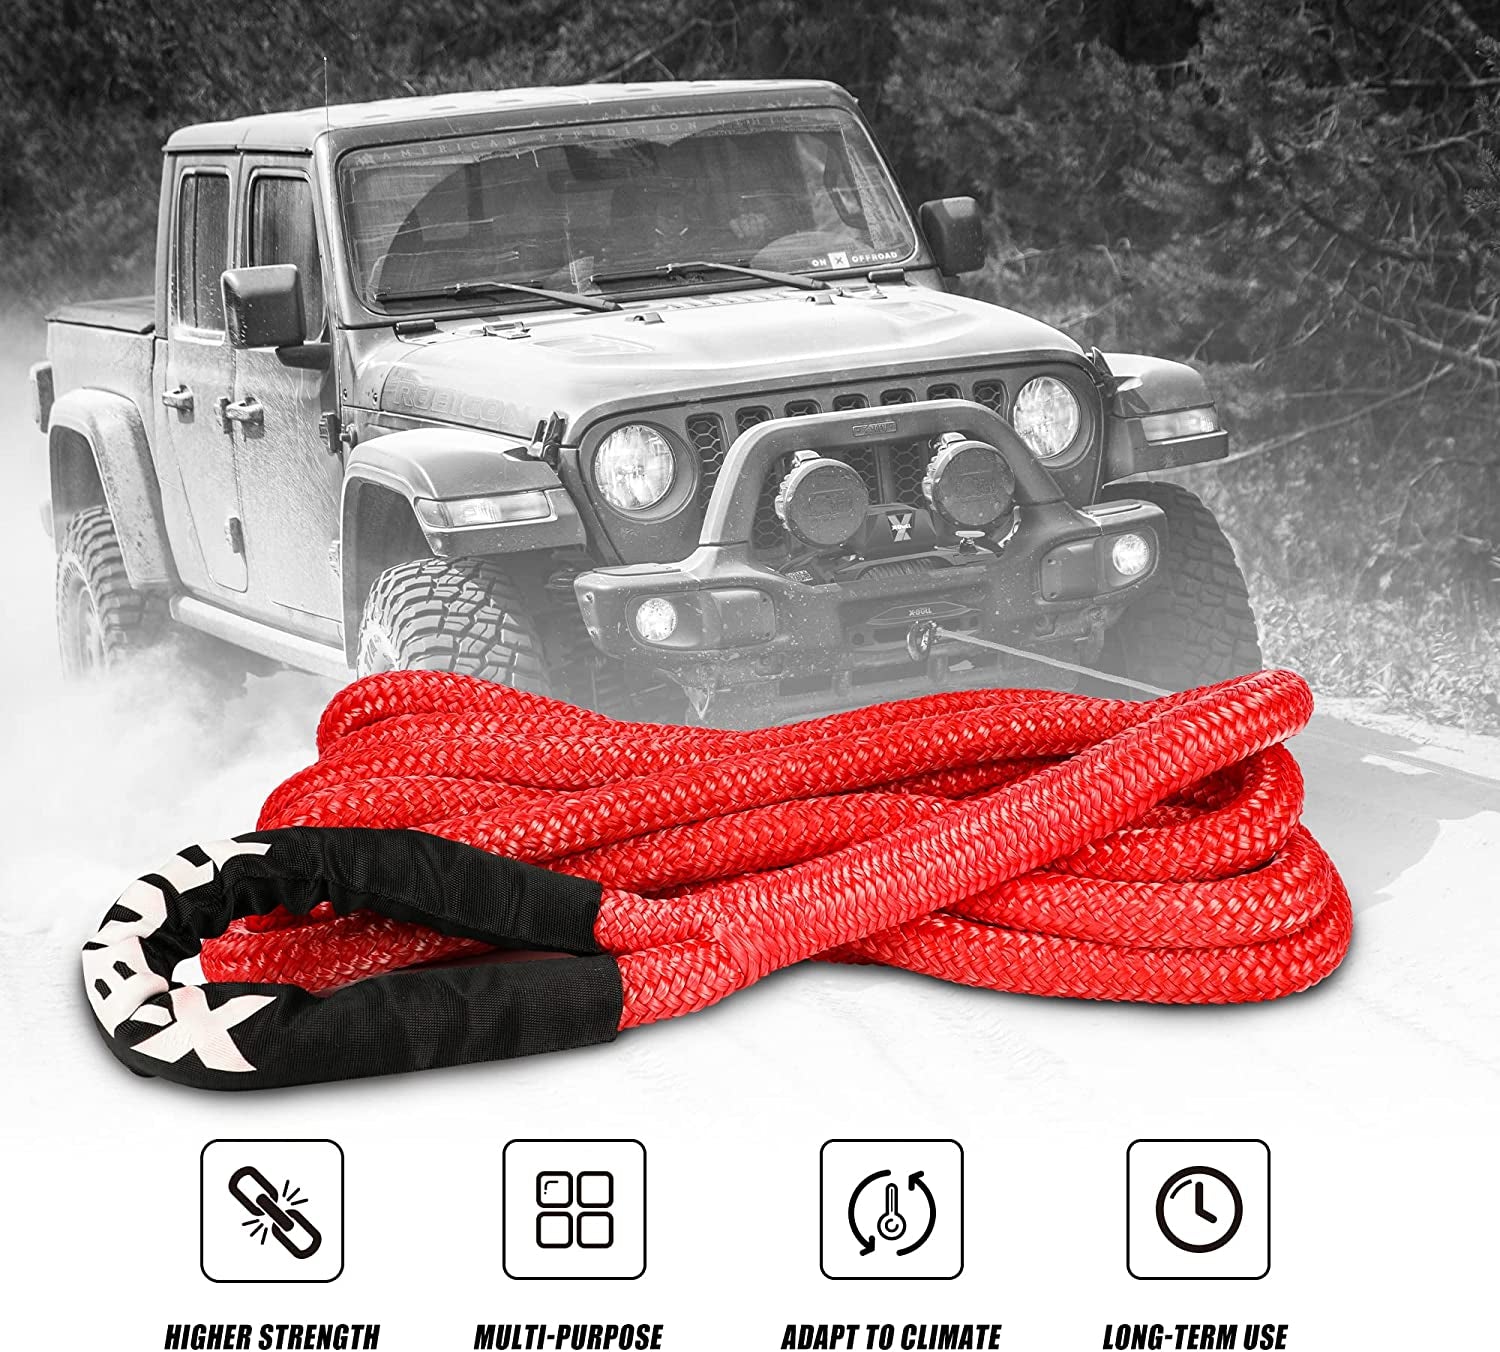 Greaker Limited Edition Kinetic Recovery Tow Rope Heavy Duty Offroad - Unique 4x4 Style (Gold Sahara, 3/4 x30')